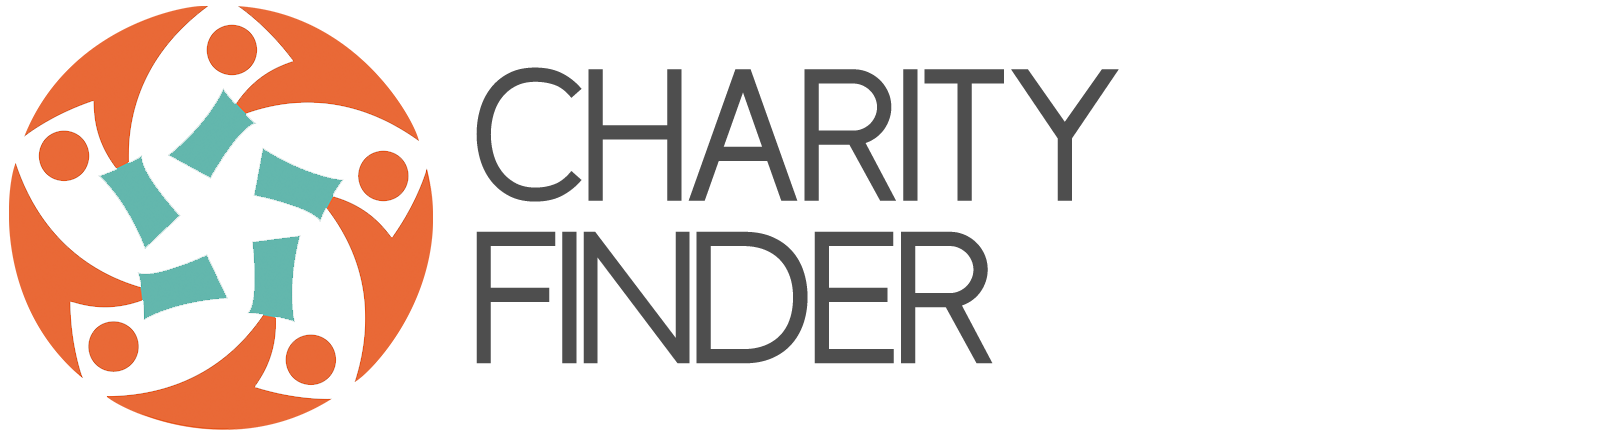 Charity Finder